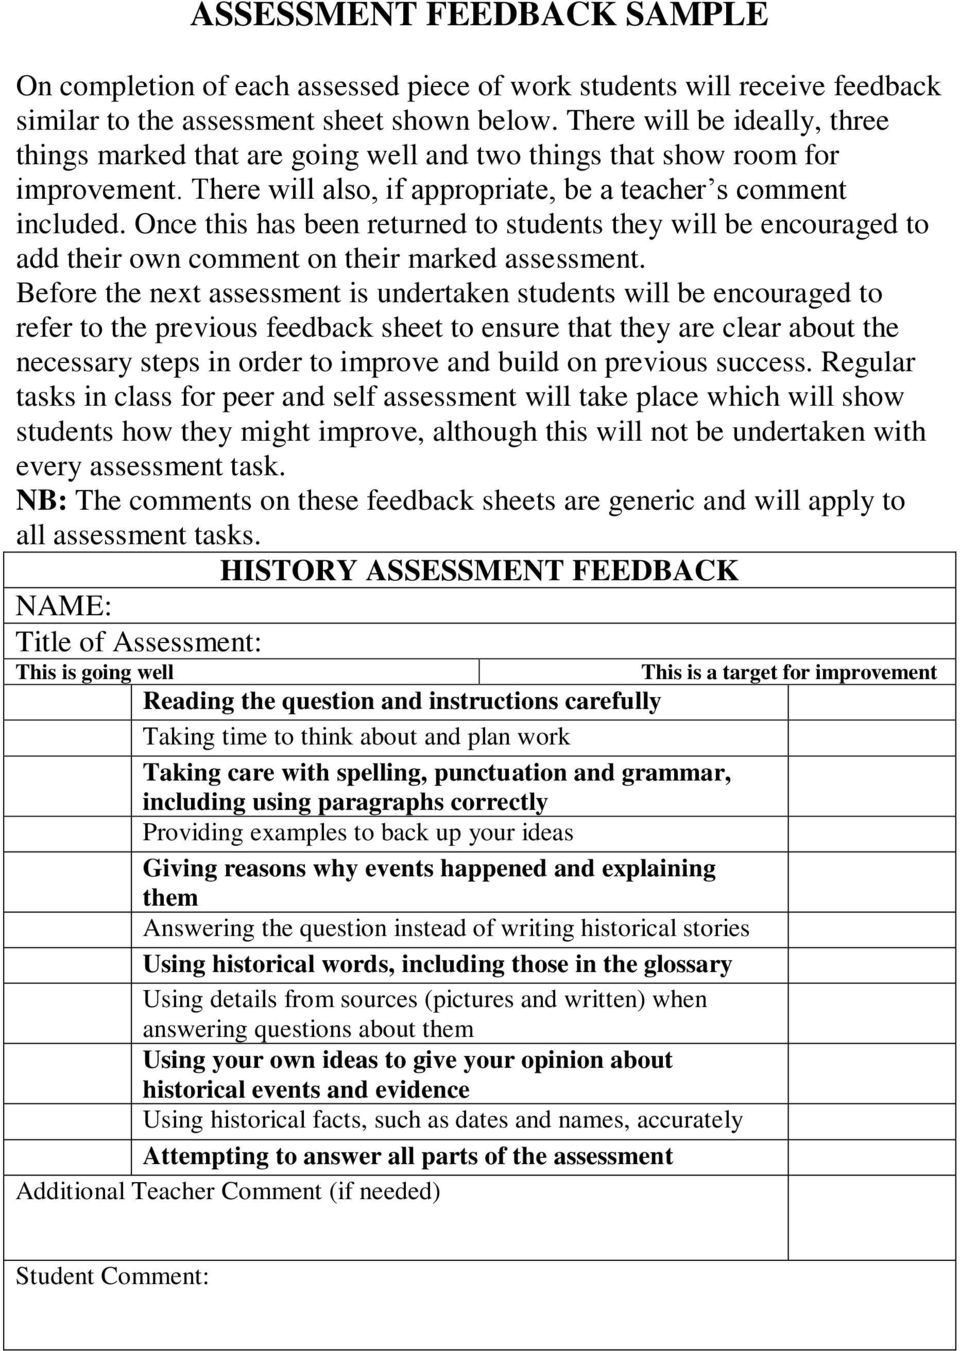 Once this has been returned to students they will be encouraged to add their own comment on their marked assessment.